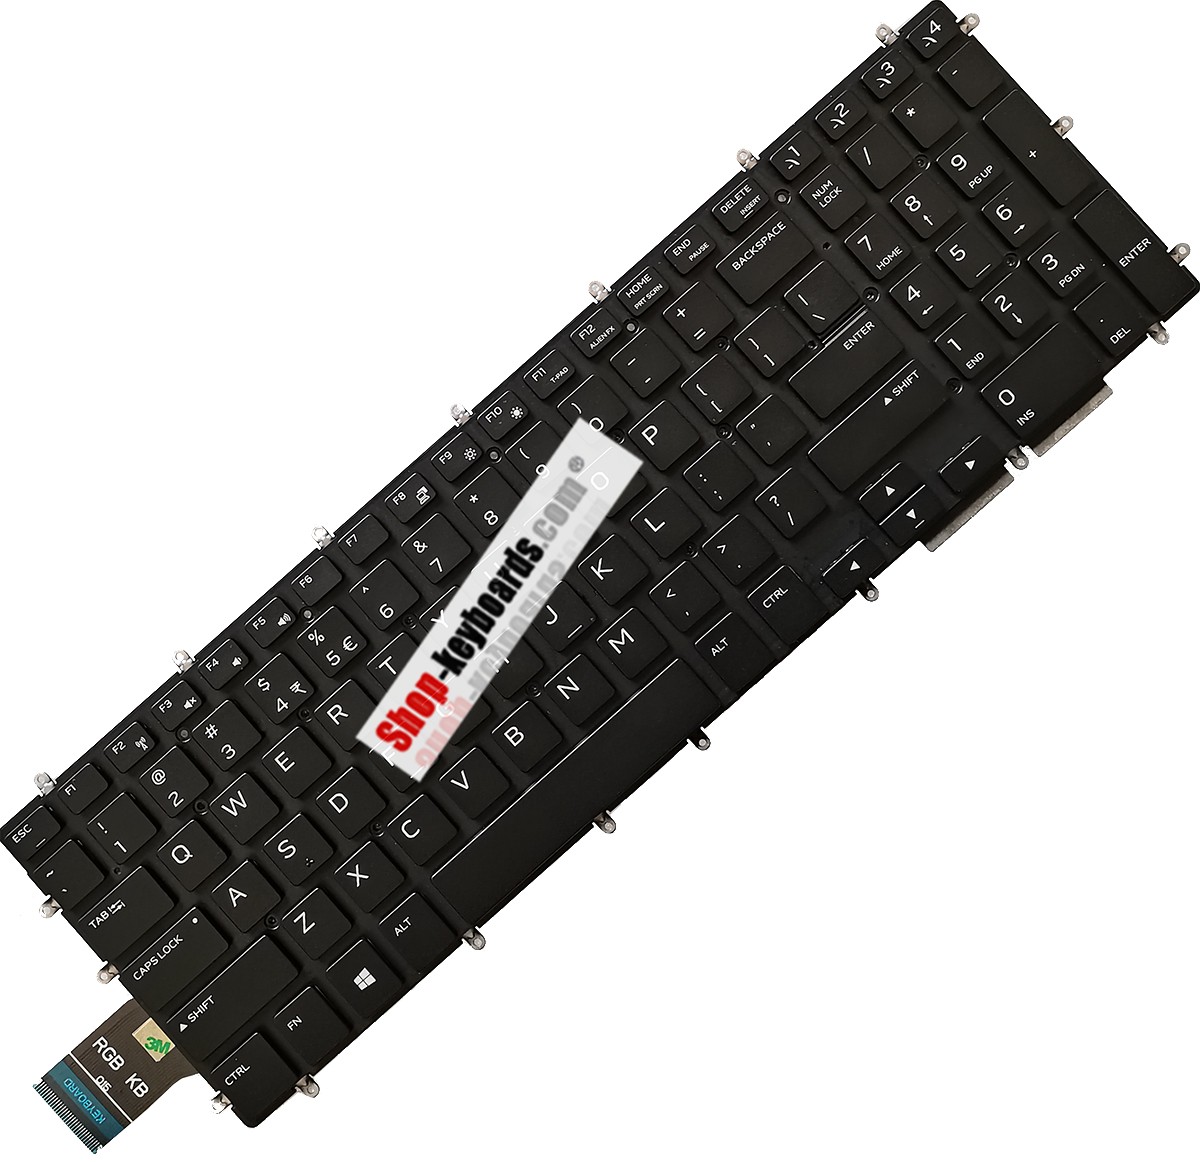 Dell AW15-6320 Keyboard replacement